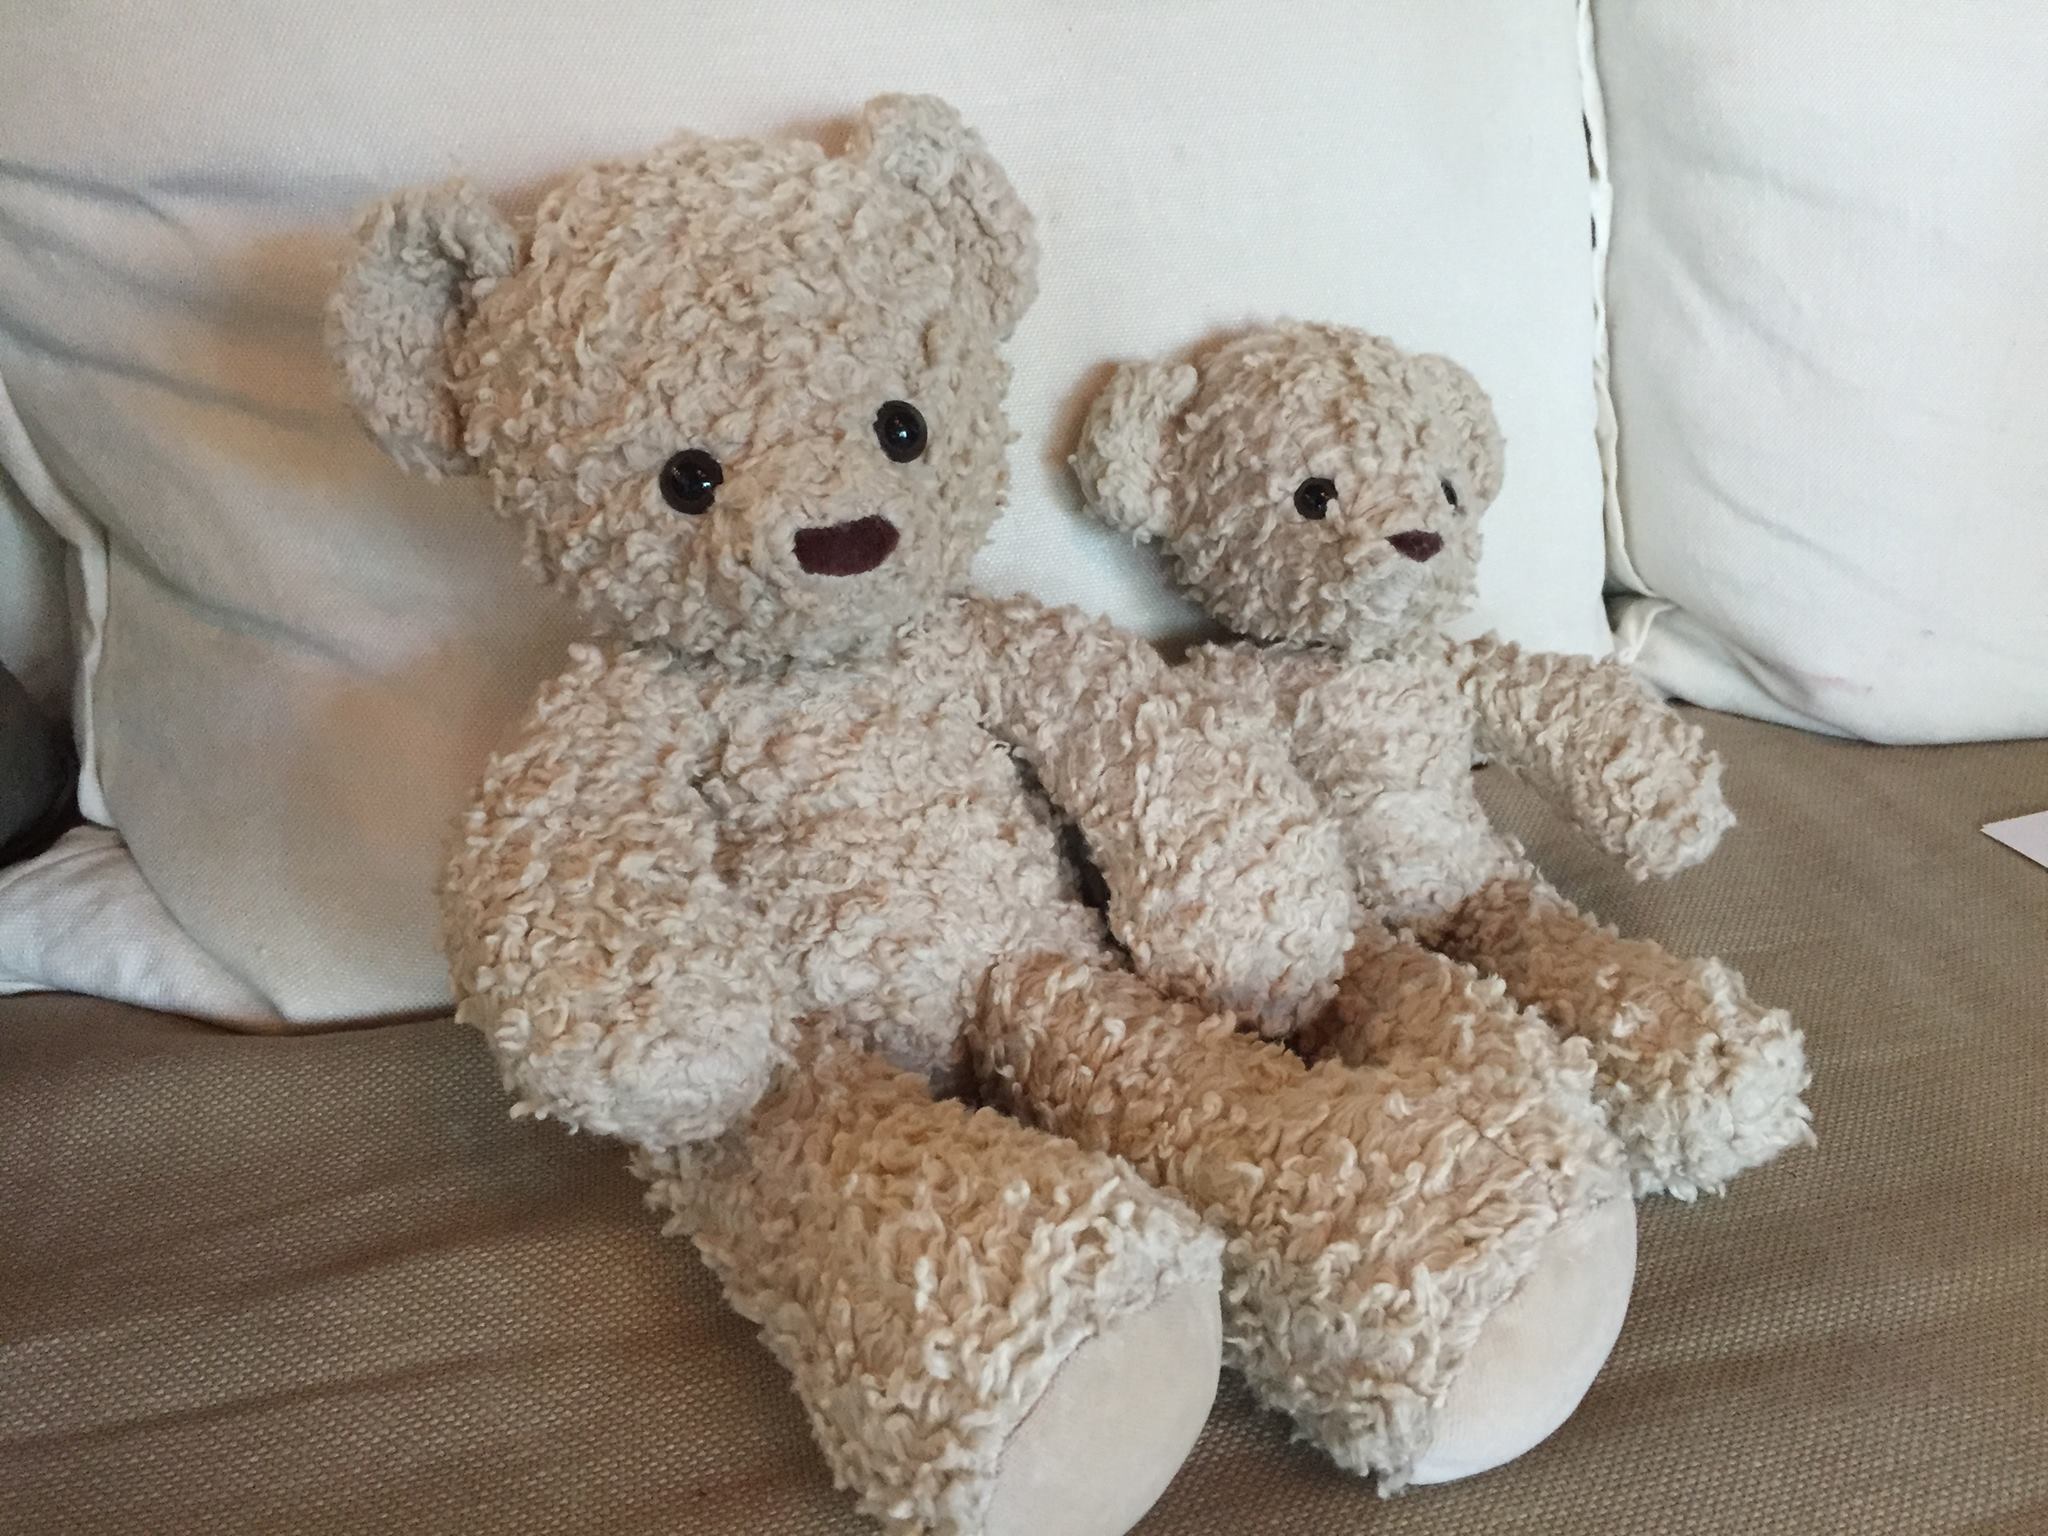 Carroll Pharmacy to donate teddy bears to Children's Hospital through buy one, give one event